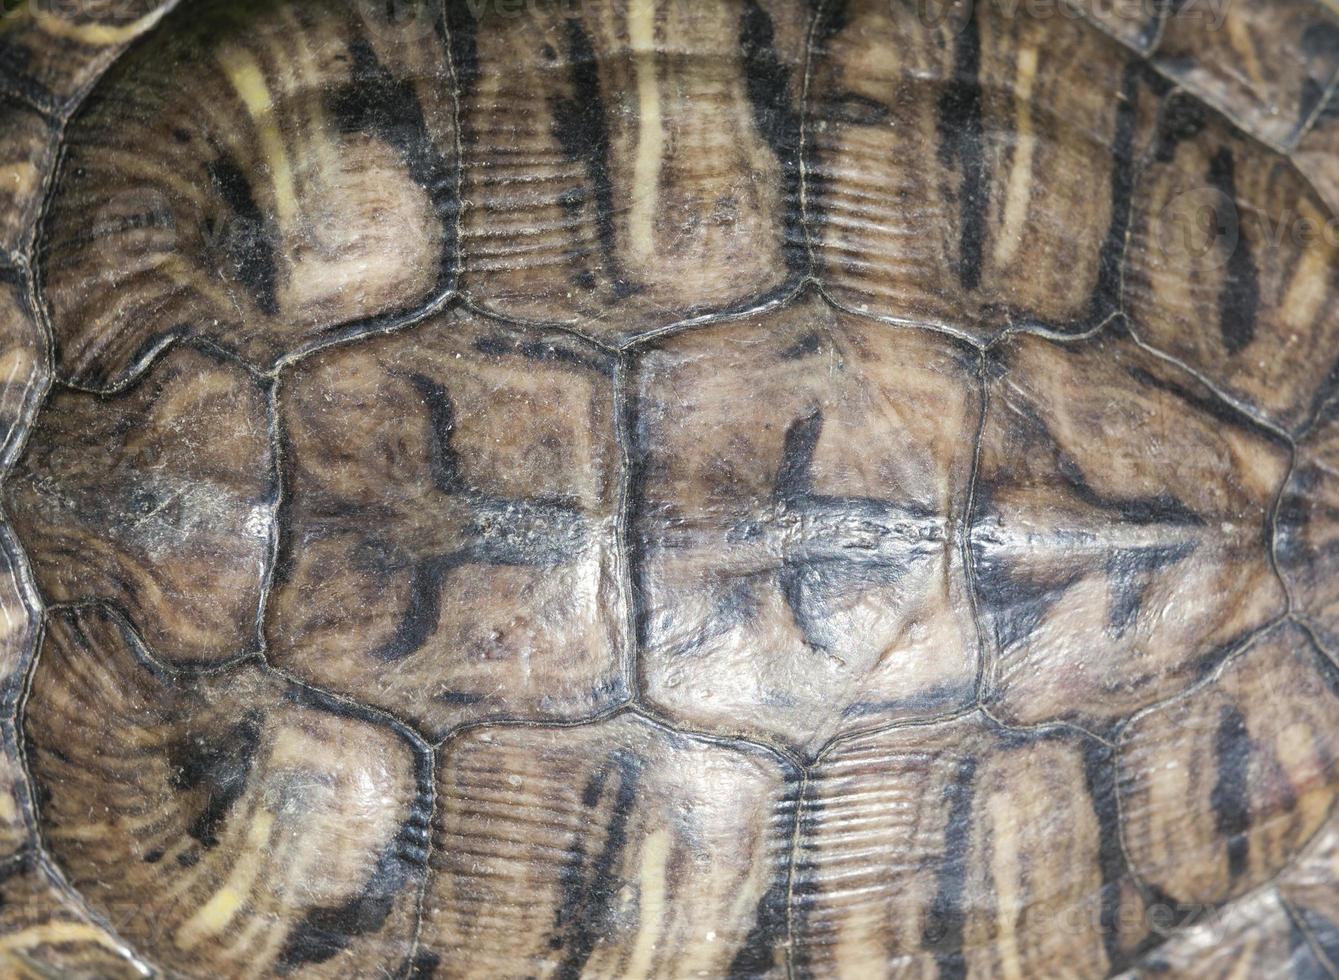 red-bellied turtle, close up photo